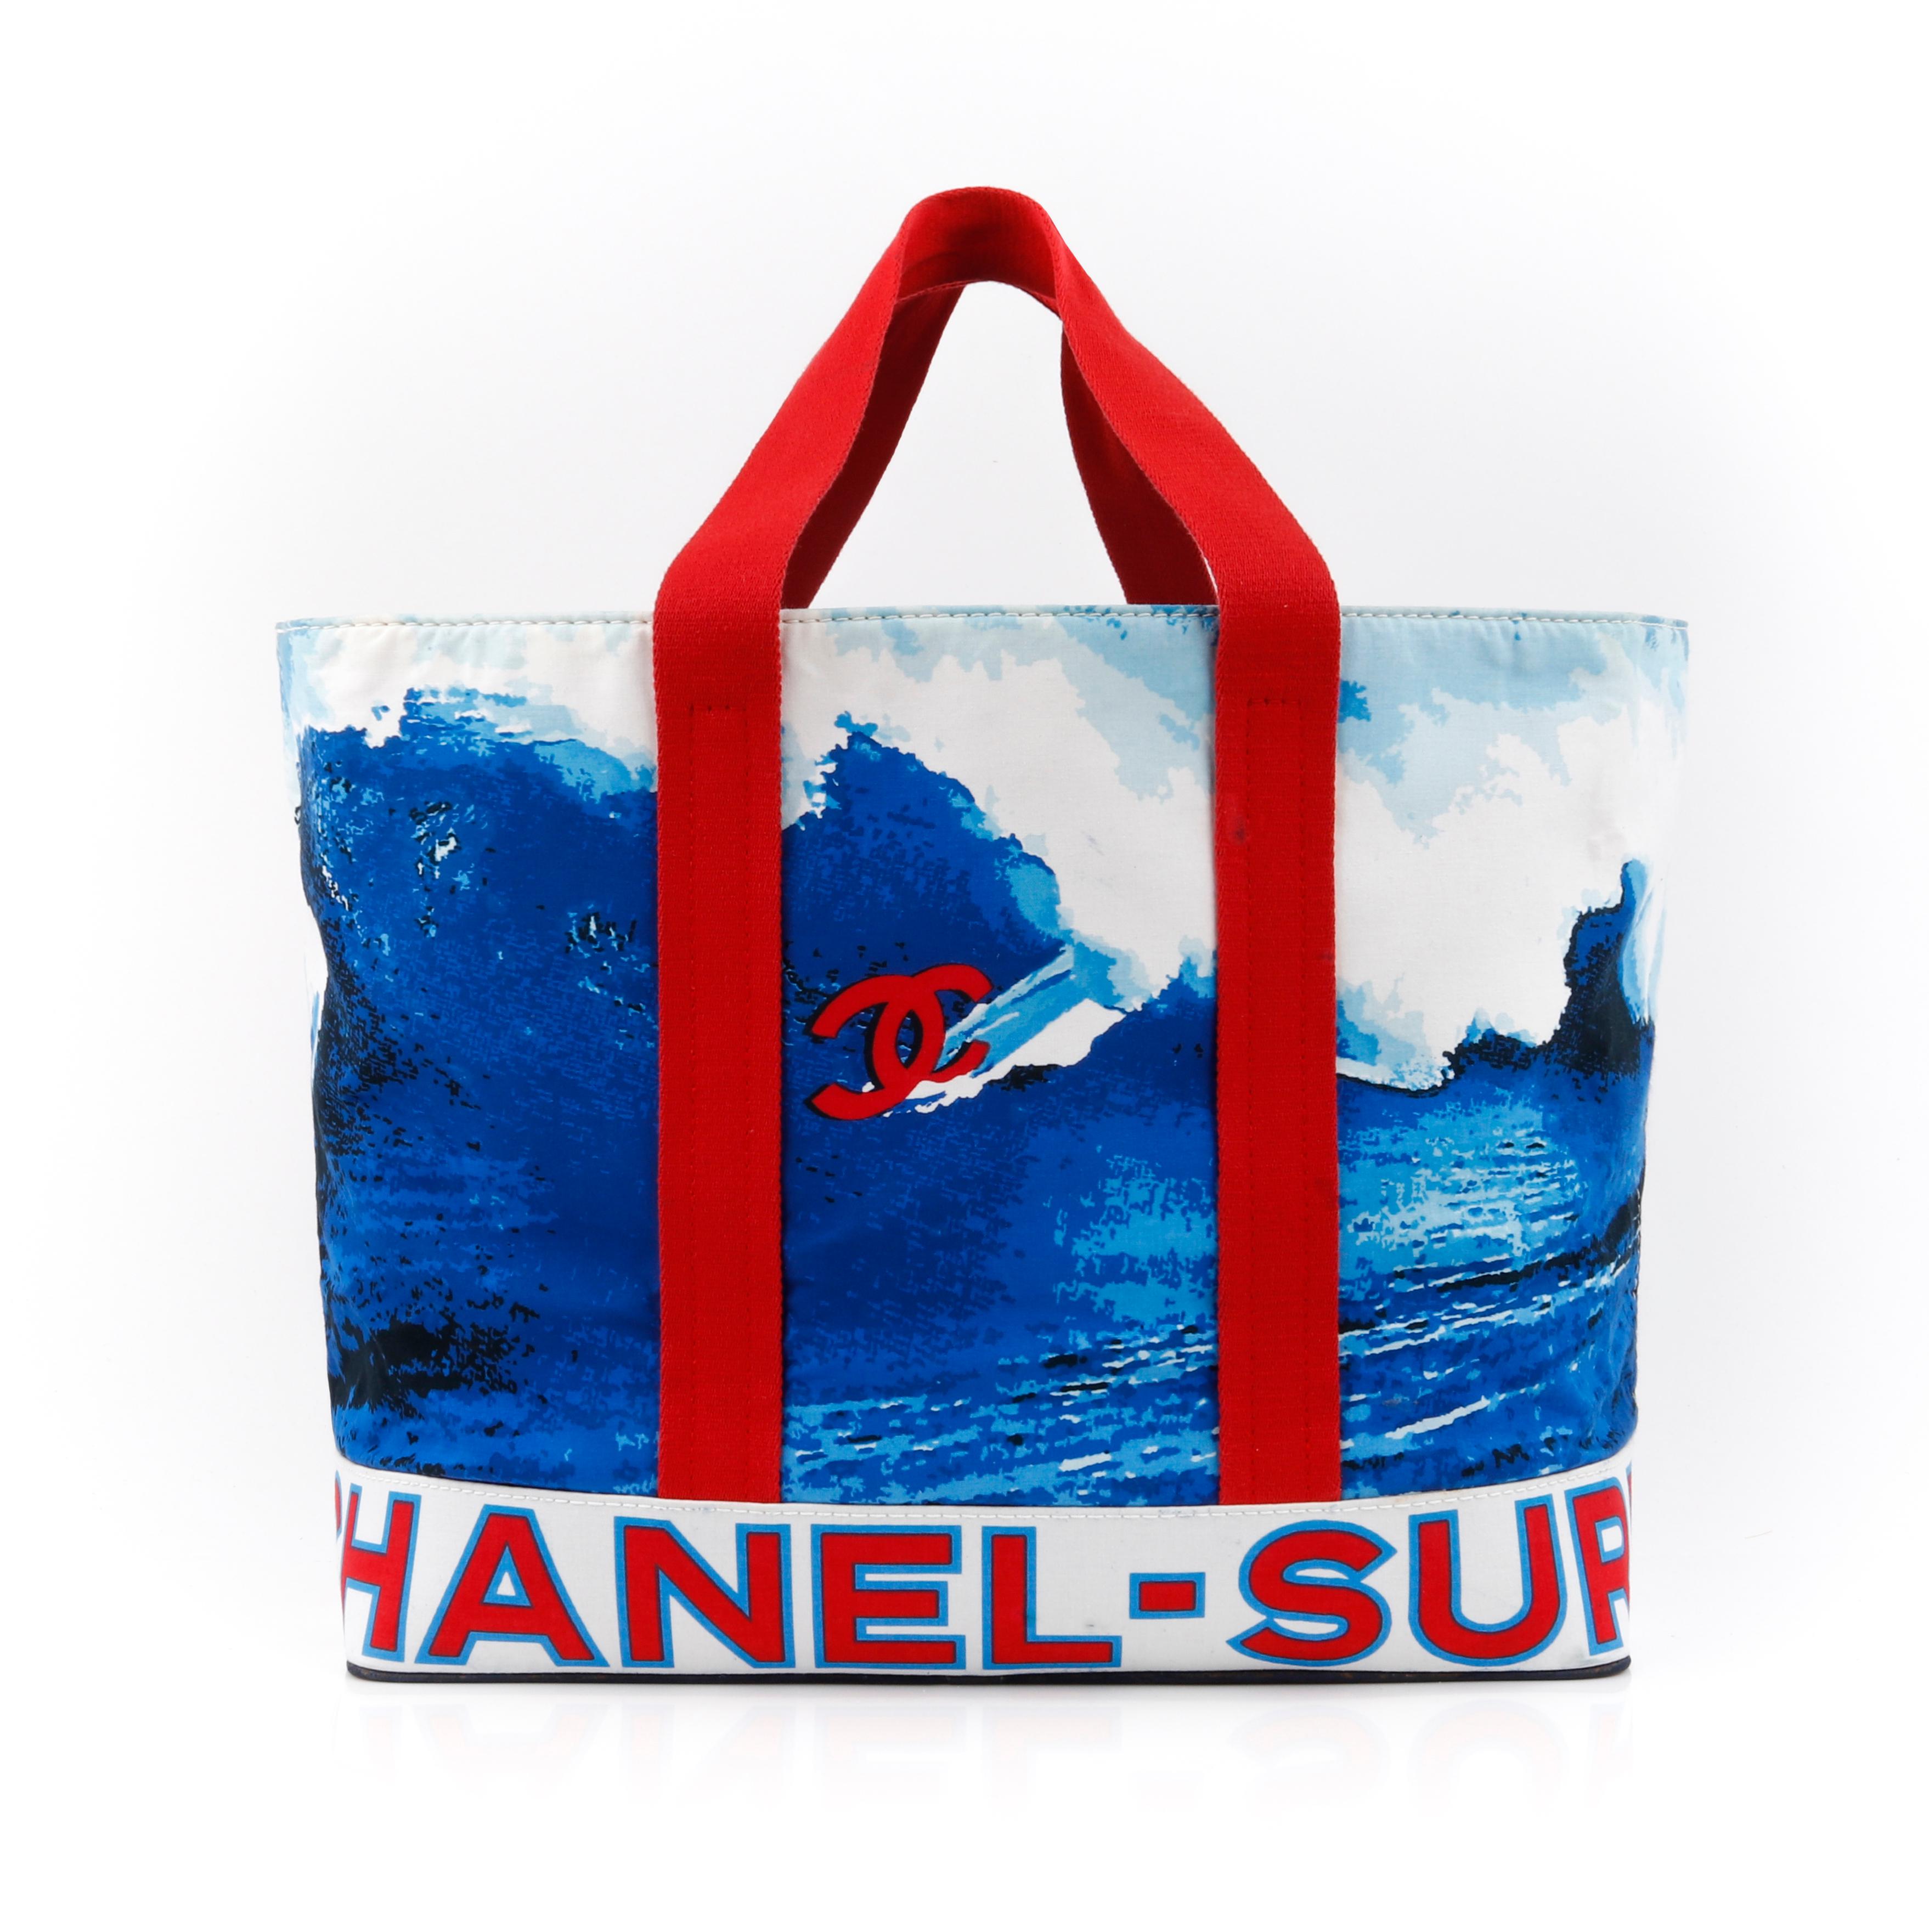 CHANEL c.2002 Red White Blue CC Surf Wave Canvas Beach Bag Large Tote
 
Brand / Manufacturer: Chanel
Style: Beach bag / Tote
Color(s): Shades of red, white and blue. 
Unmarked Materials: Canvas (exterior), Coated Canvas (base).
Additional Details /